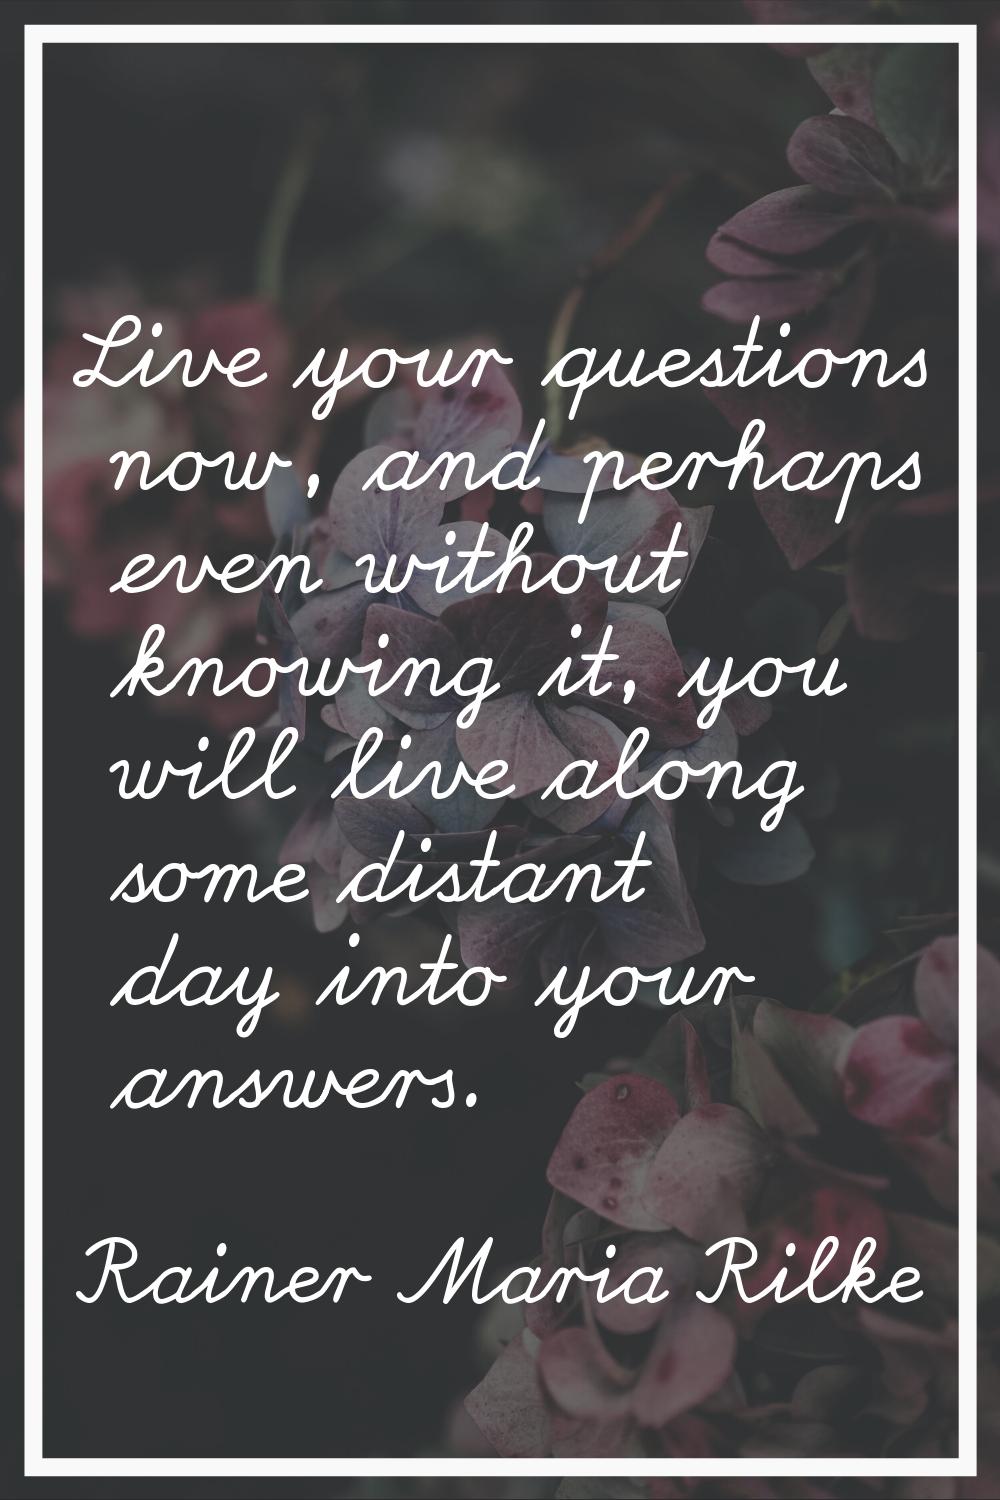 Live your questions now, and perhaps even without knowing it, you will live along some distant day 